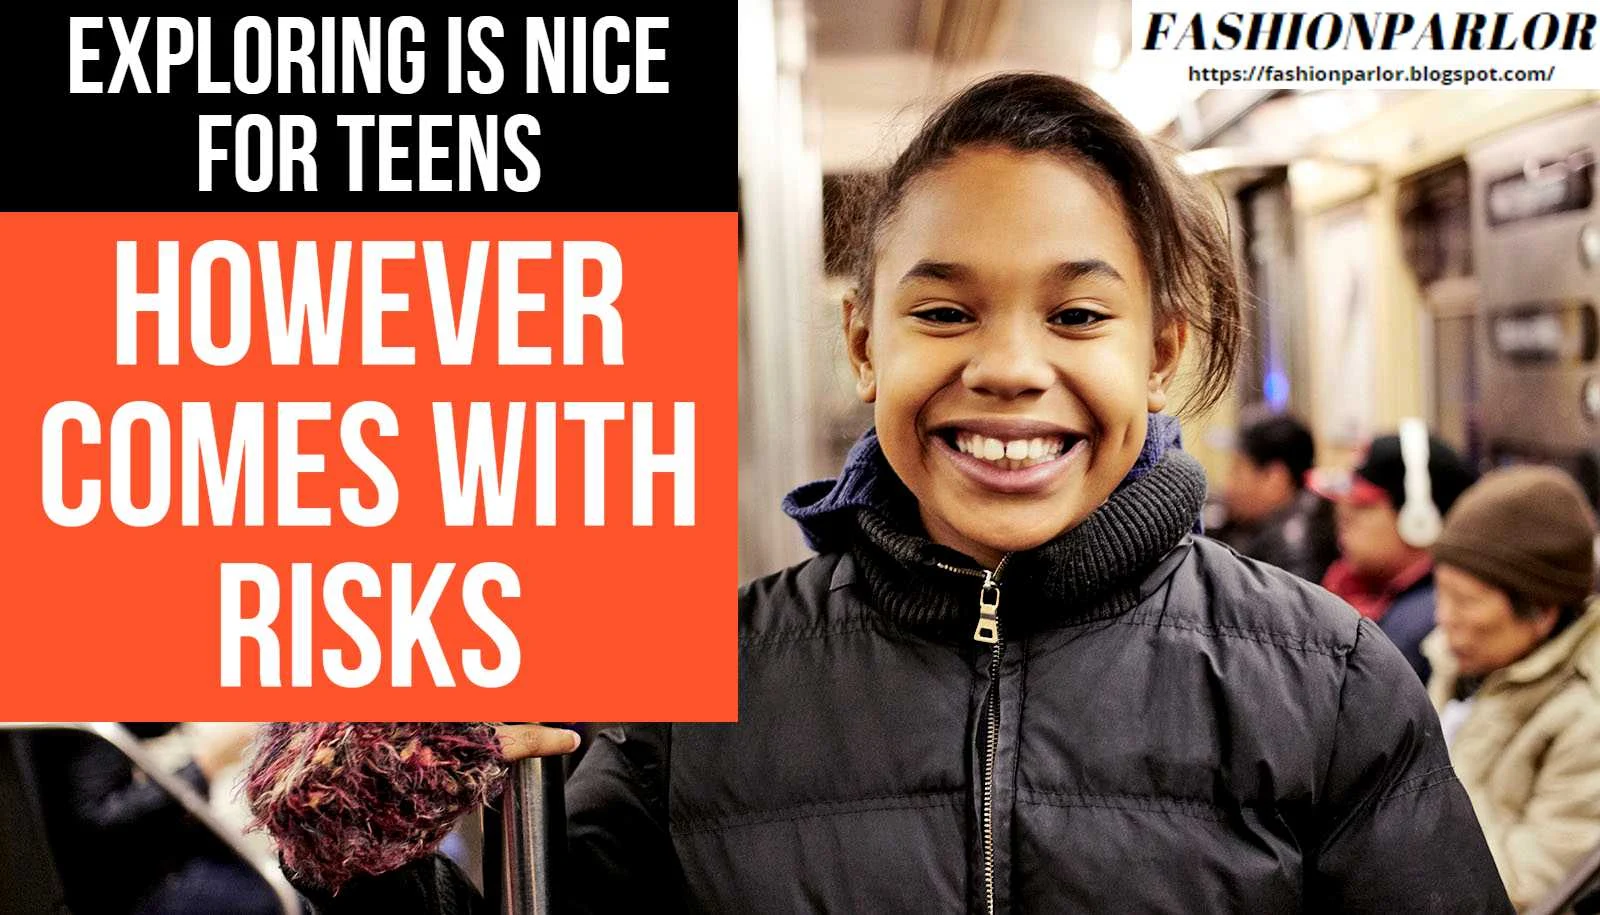 EXPLORING is nice FOR TEENS, however COMES WITH RISKS